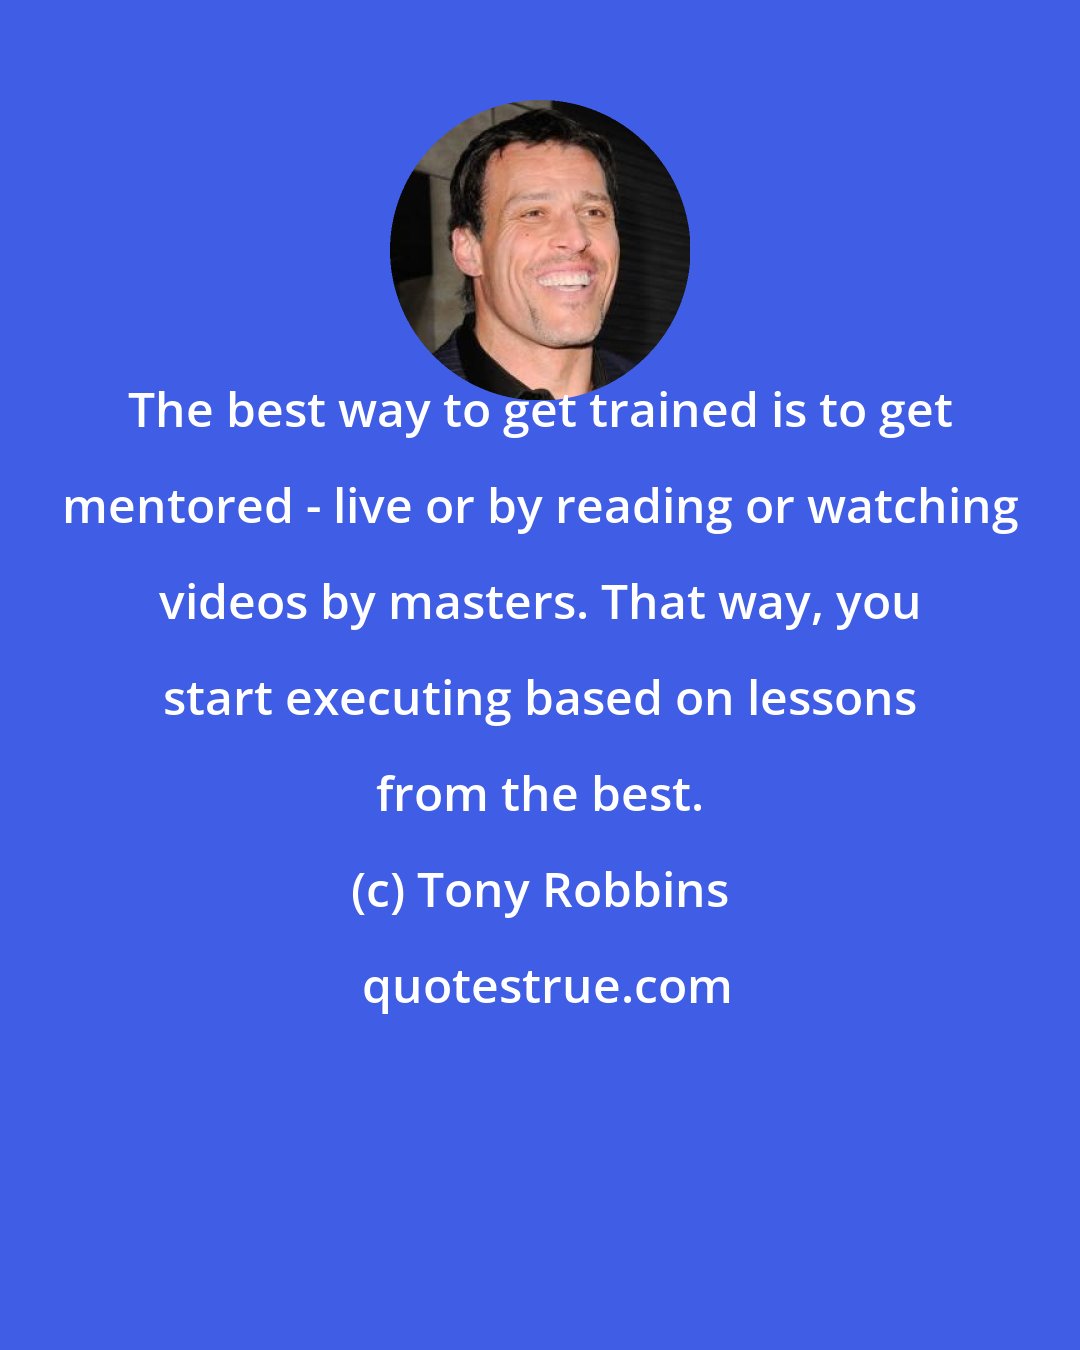 Tony Robbins: The best way to get trained is to get mentored - live or by reading or watching videos by masters. That way, you start executing based on lessons from the best.